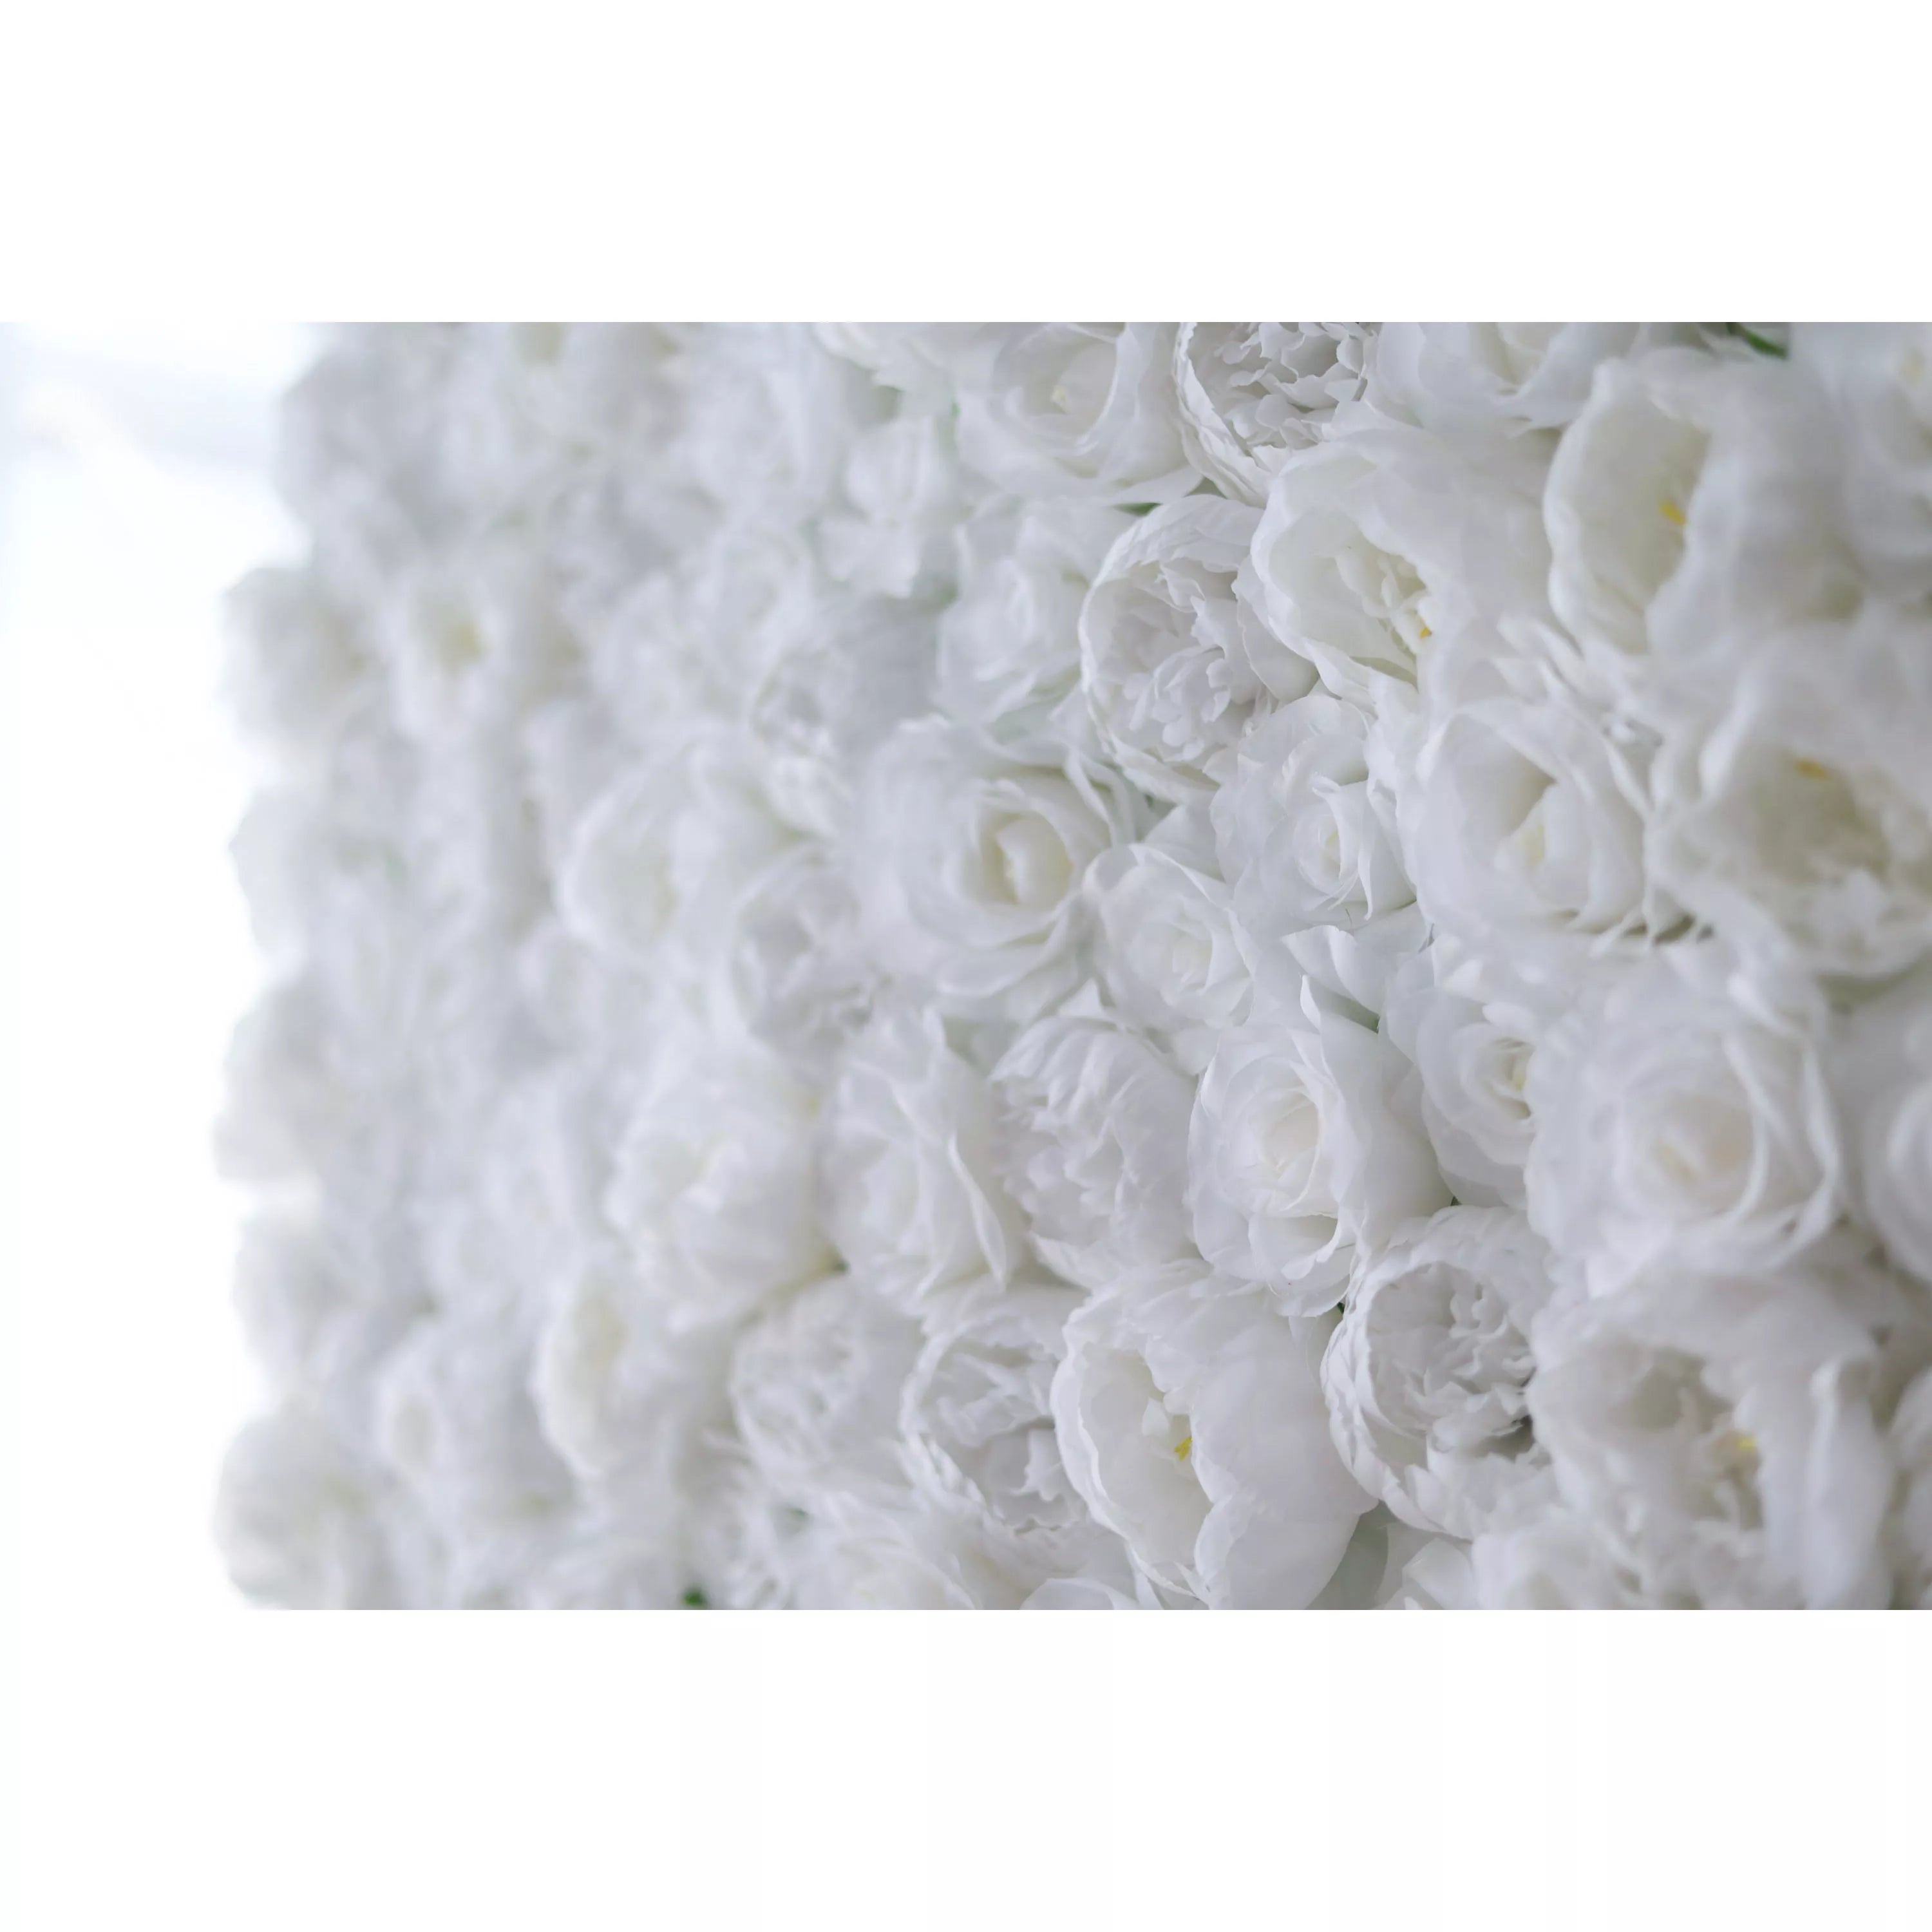 Valar Flowers Presents: White Blossom Bliss – A Dense Array of Roses in an Artificial Fabric Flower Wall-VF-211